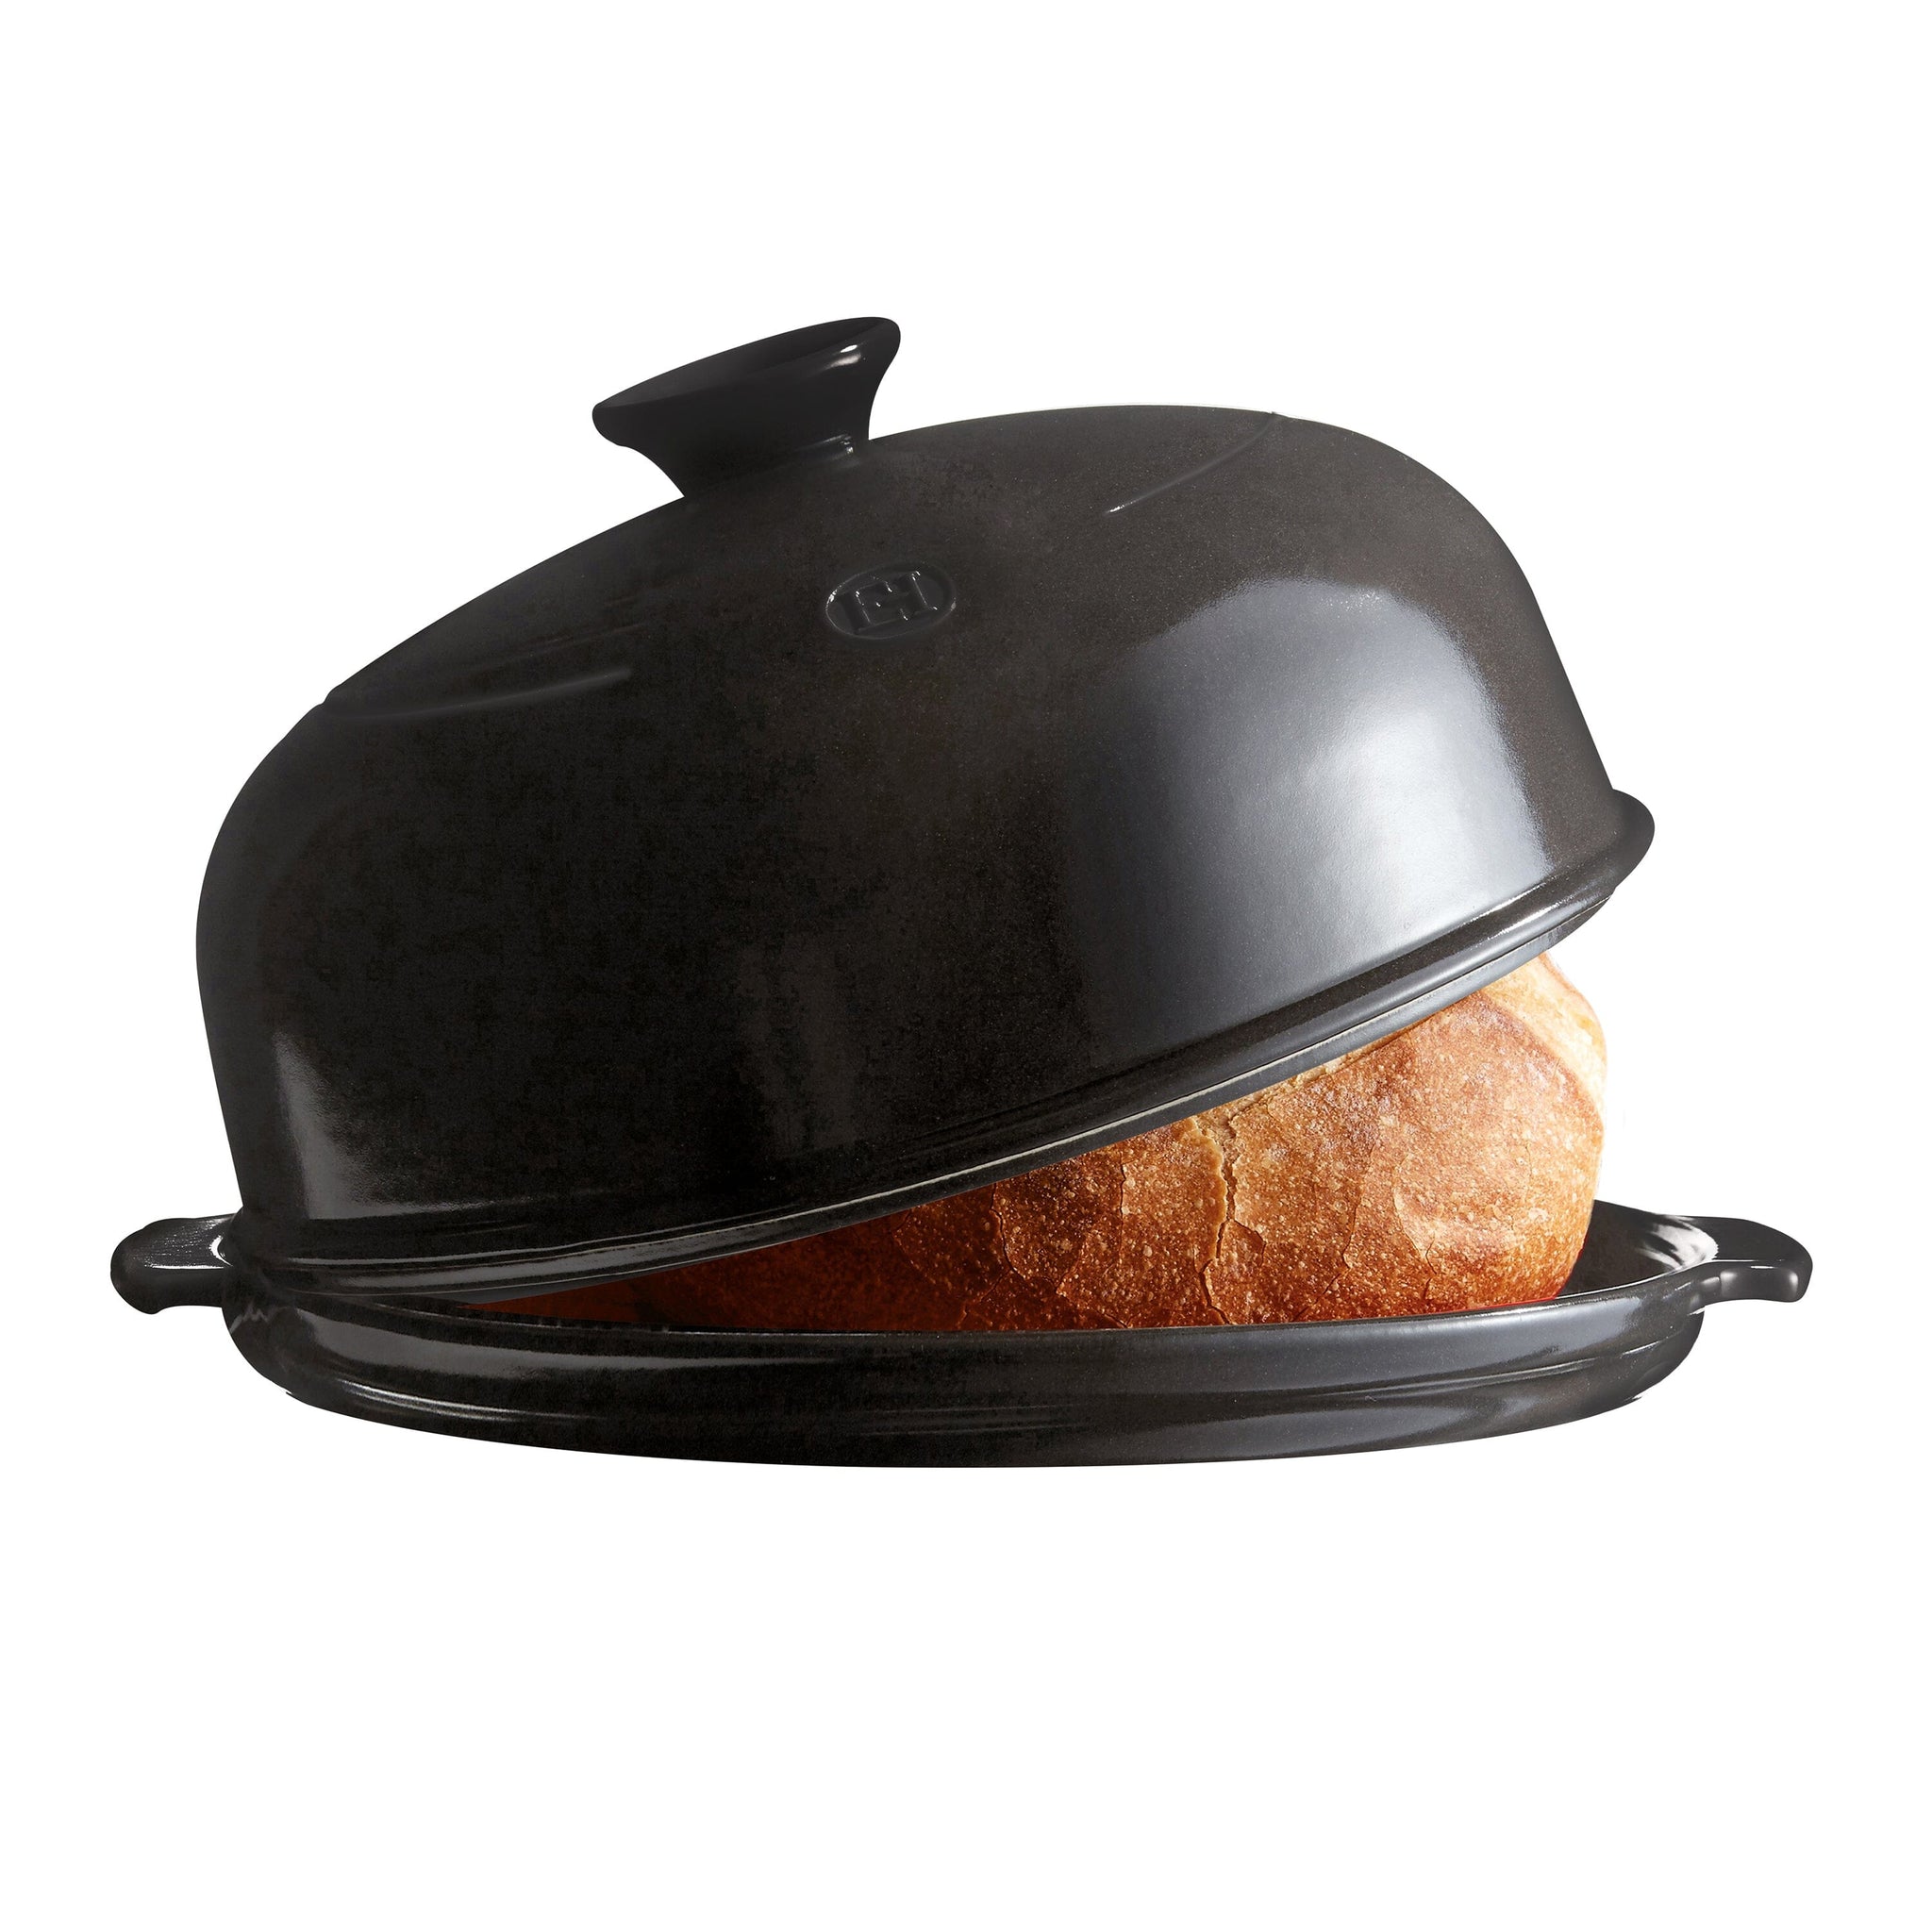 The Henry Ford - Experience Greenfield Village with practical handmade home  goods, like our NEW Village Bread Cloche. Versatile and innovative, this  crafted salt-glazed bread cloche allows you to mix your dough